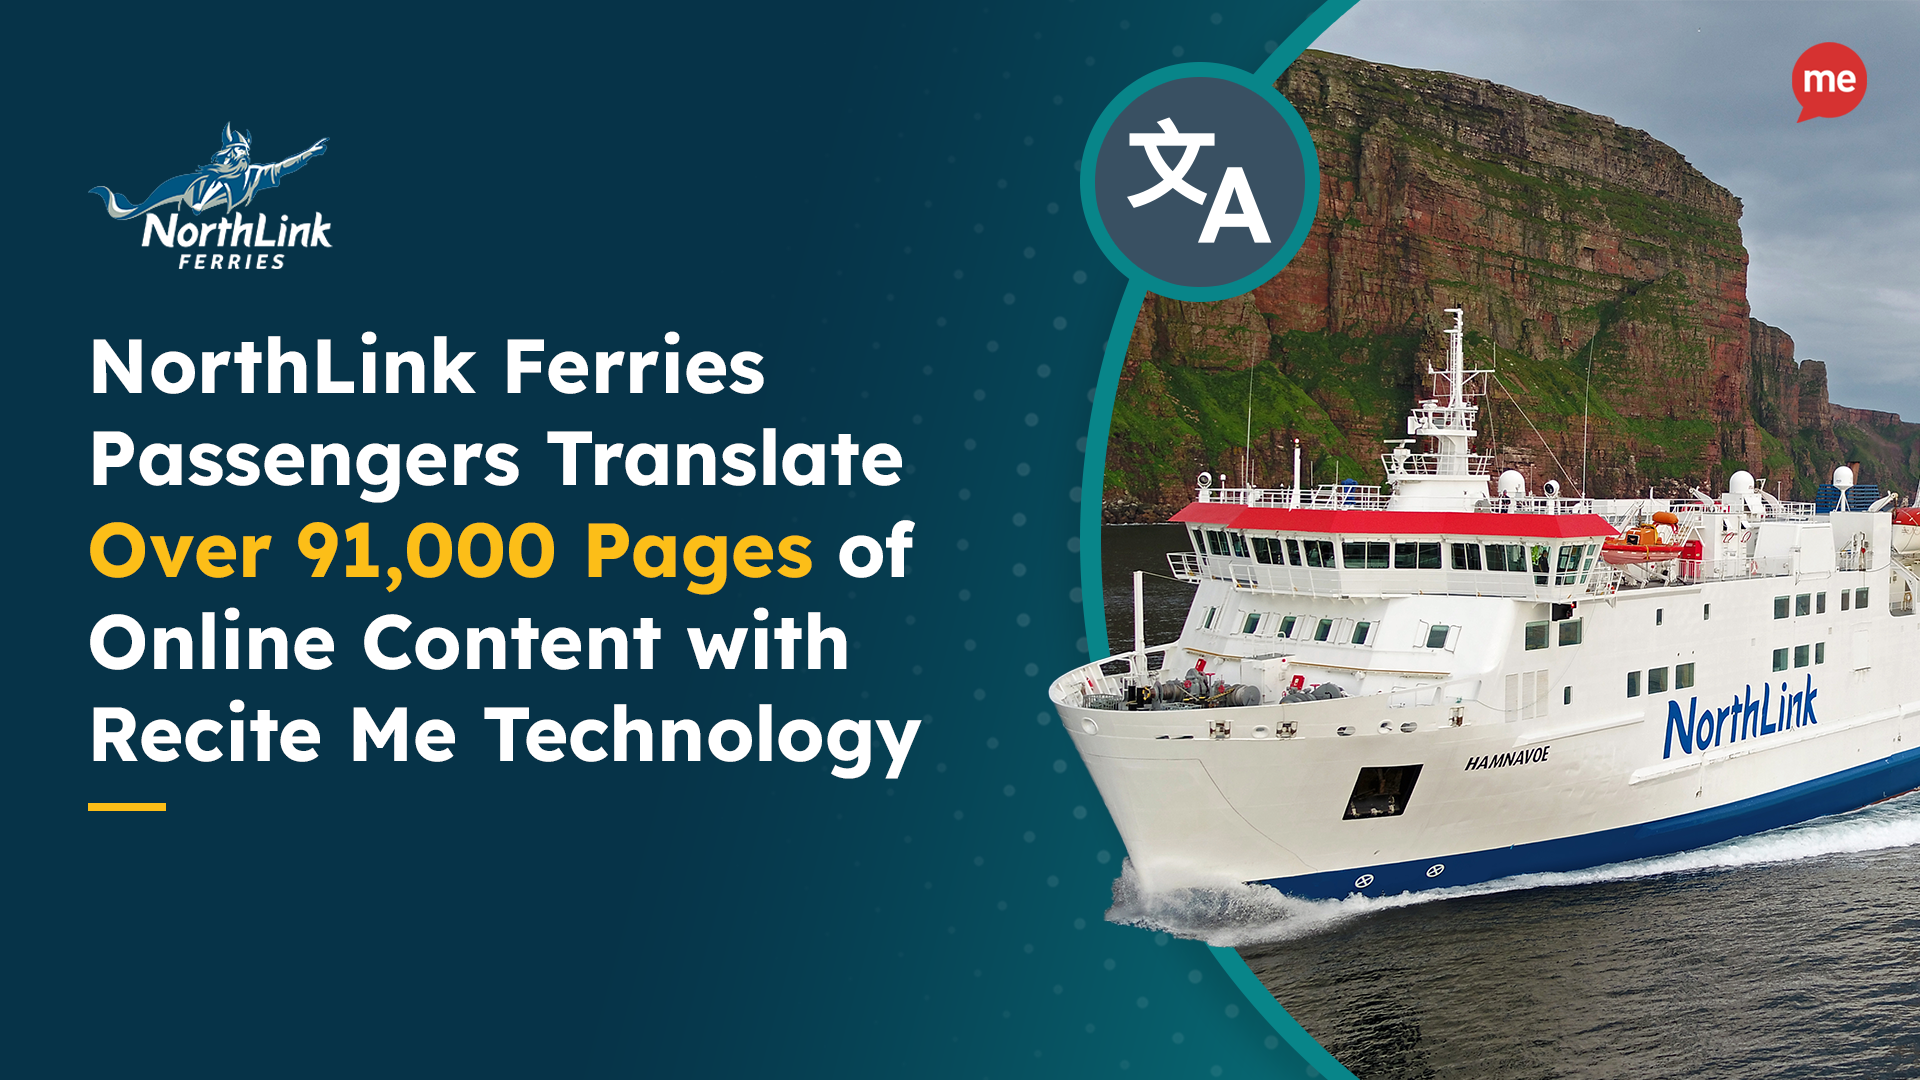 NorthLink Ferries Passengers Translate Over 91,000 Pages of Online Content with Recite Me Technology